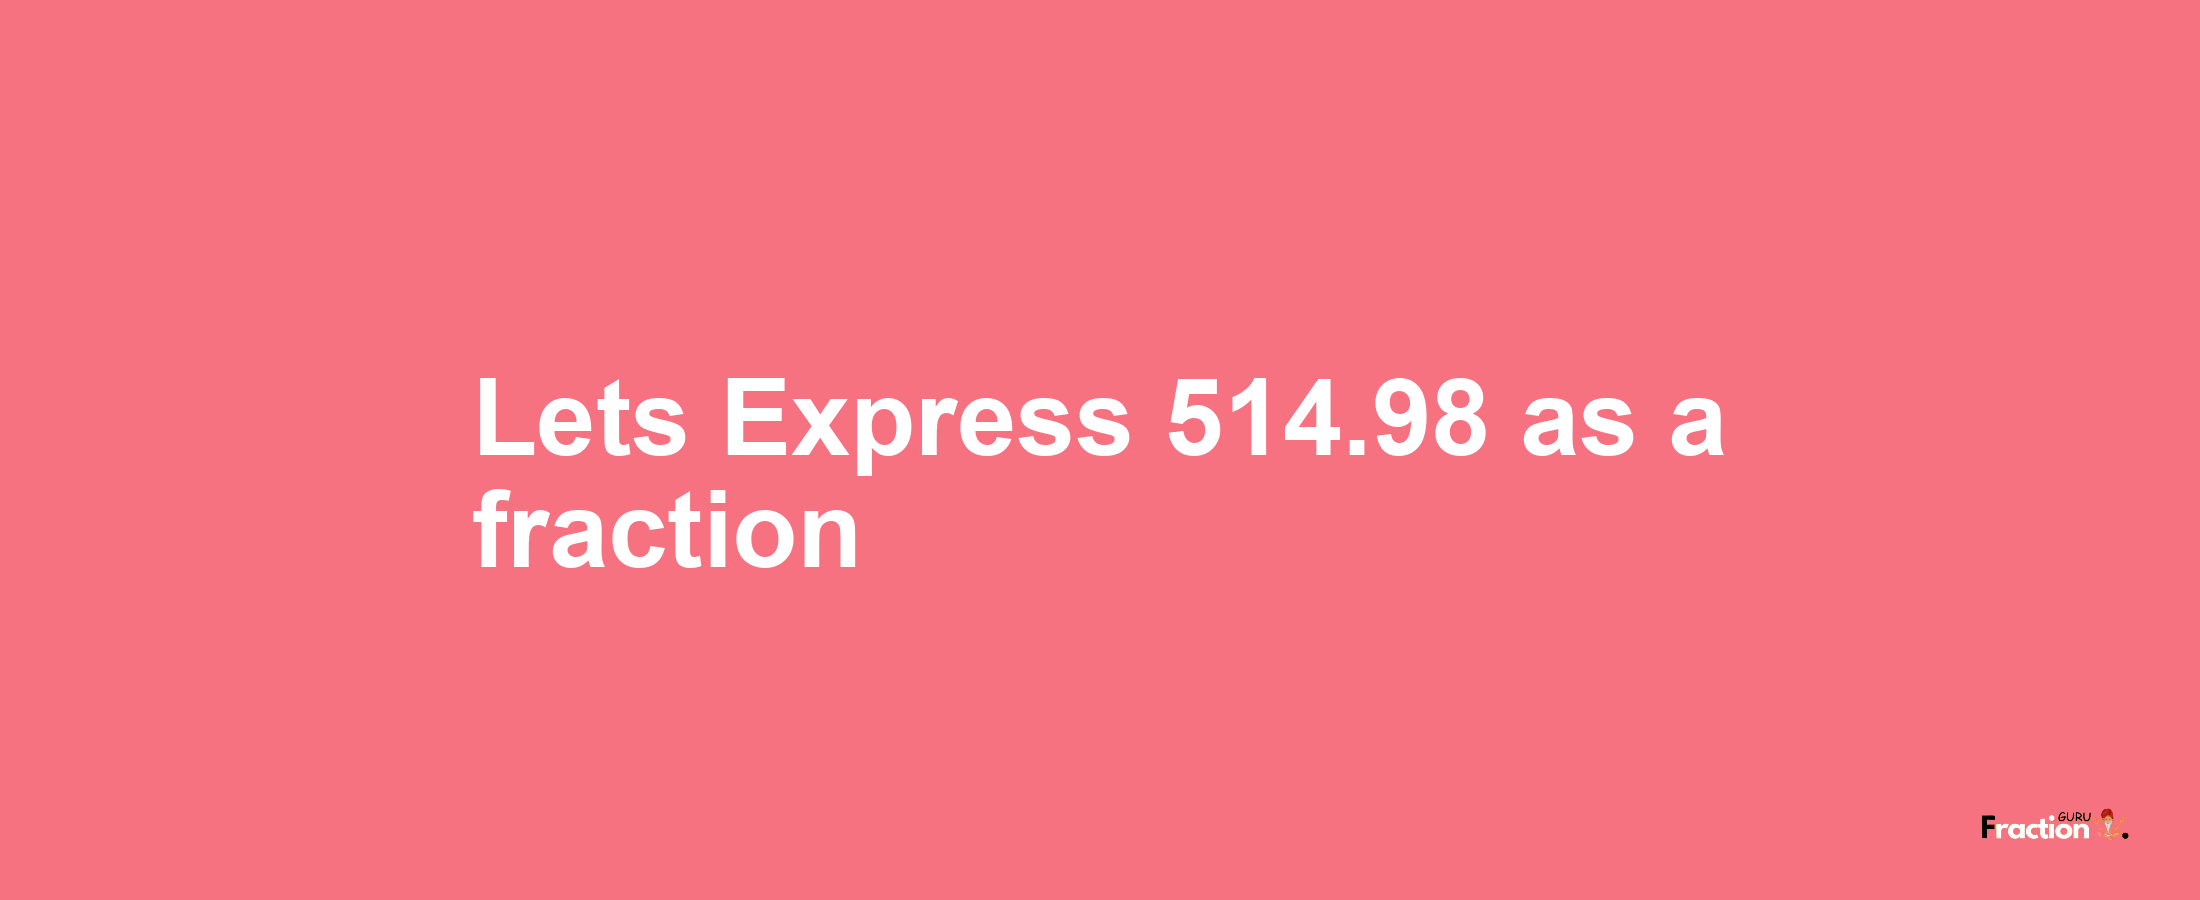 Lets Express 514.98 as afraction